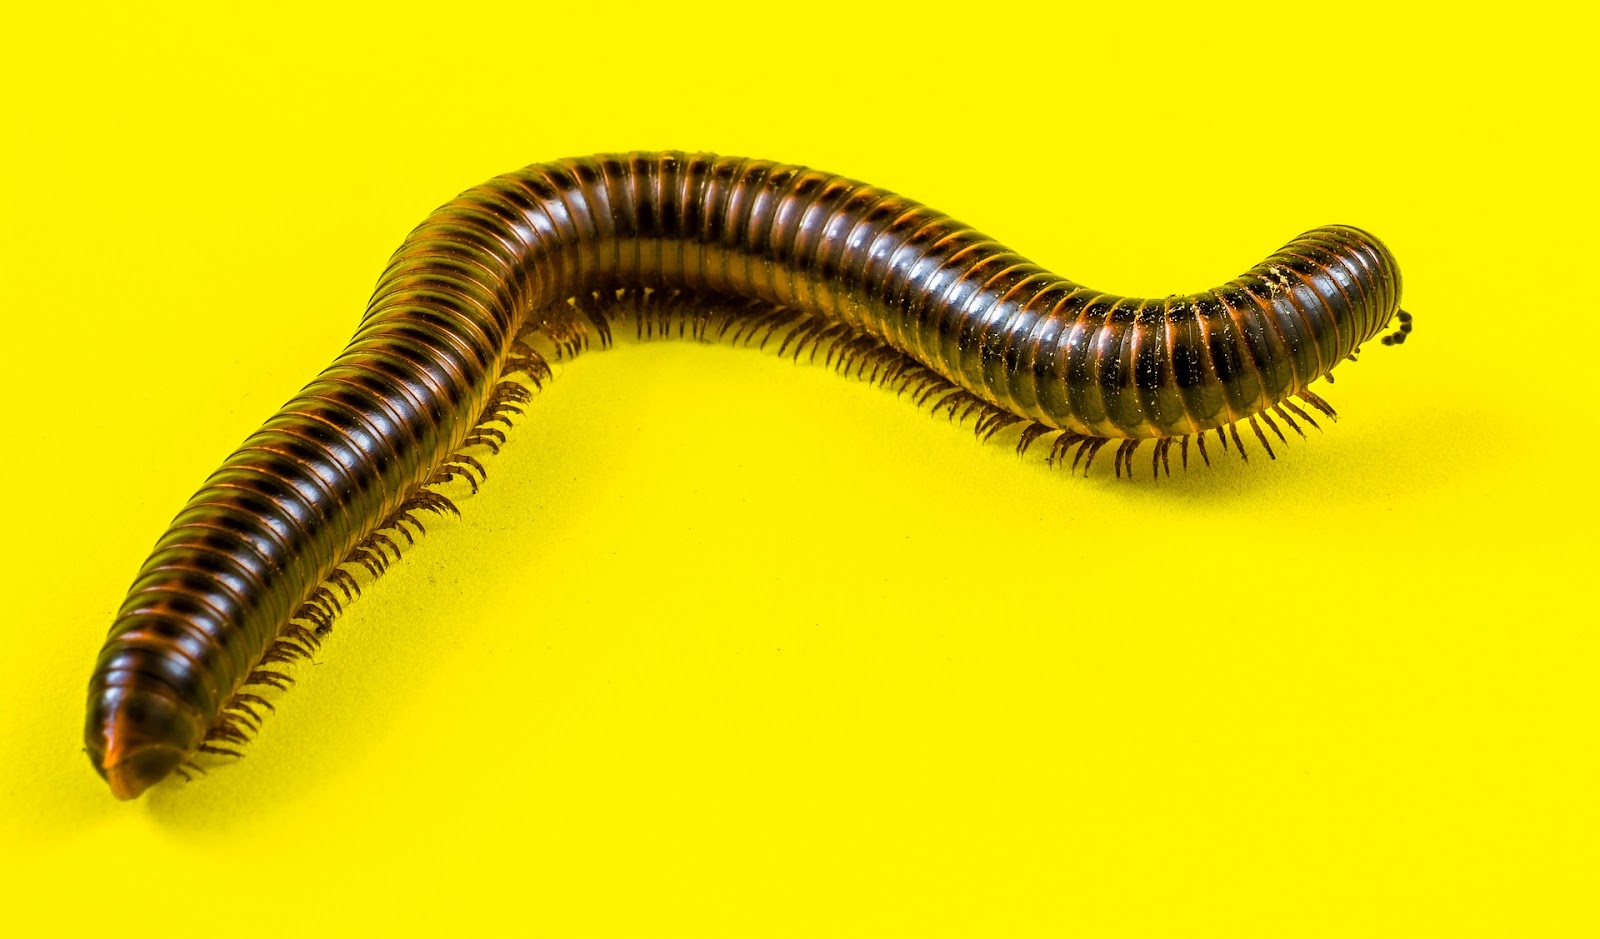 A picture of a millipede against a bright yellow background.